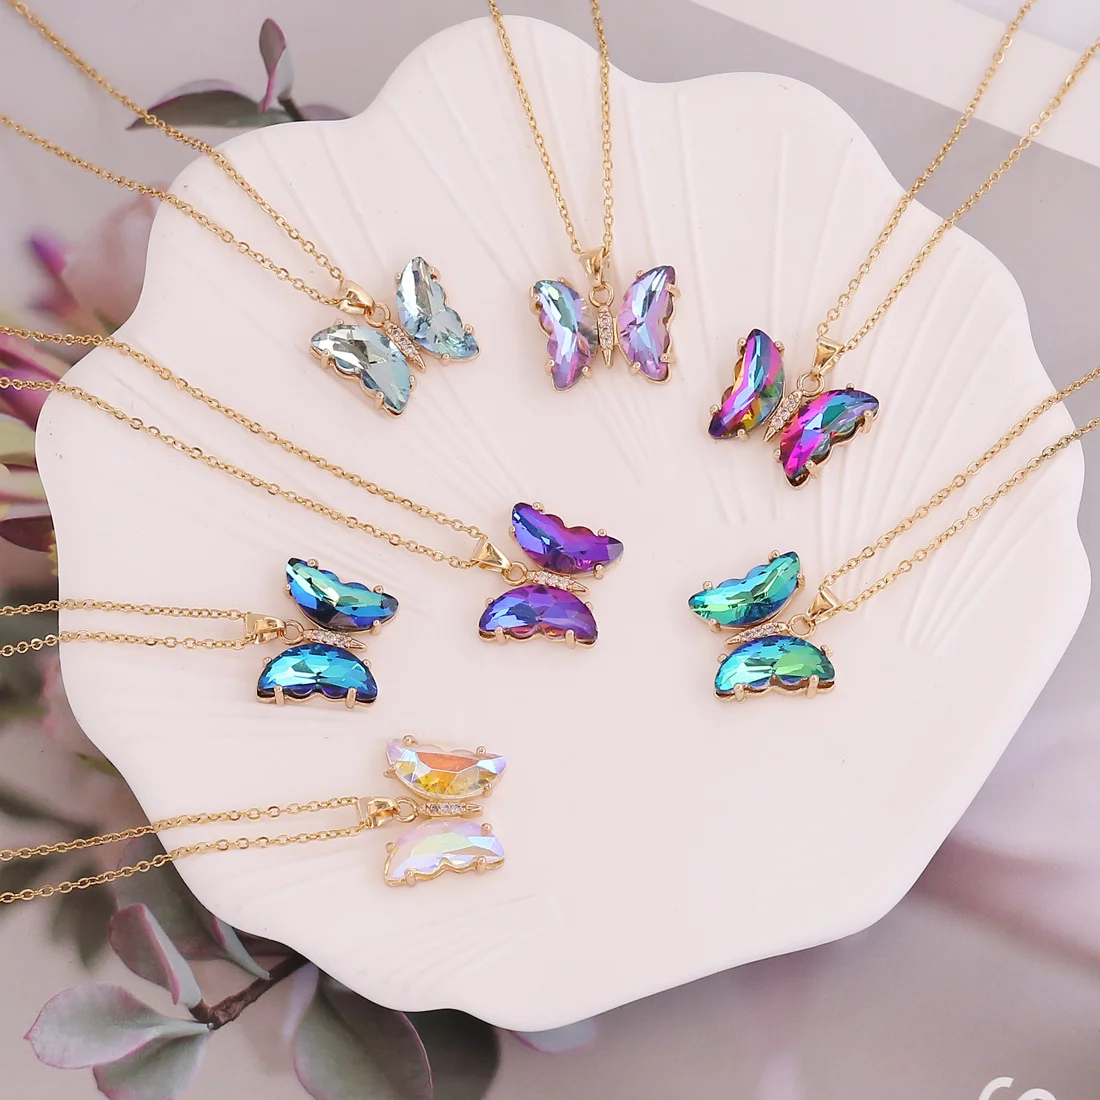 

2022 new styles 14k gold plated stainless steel gradient of color butterfly layered butterfly crystal necklaces, Picture shows